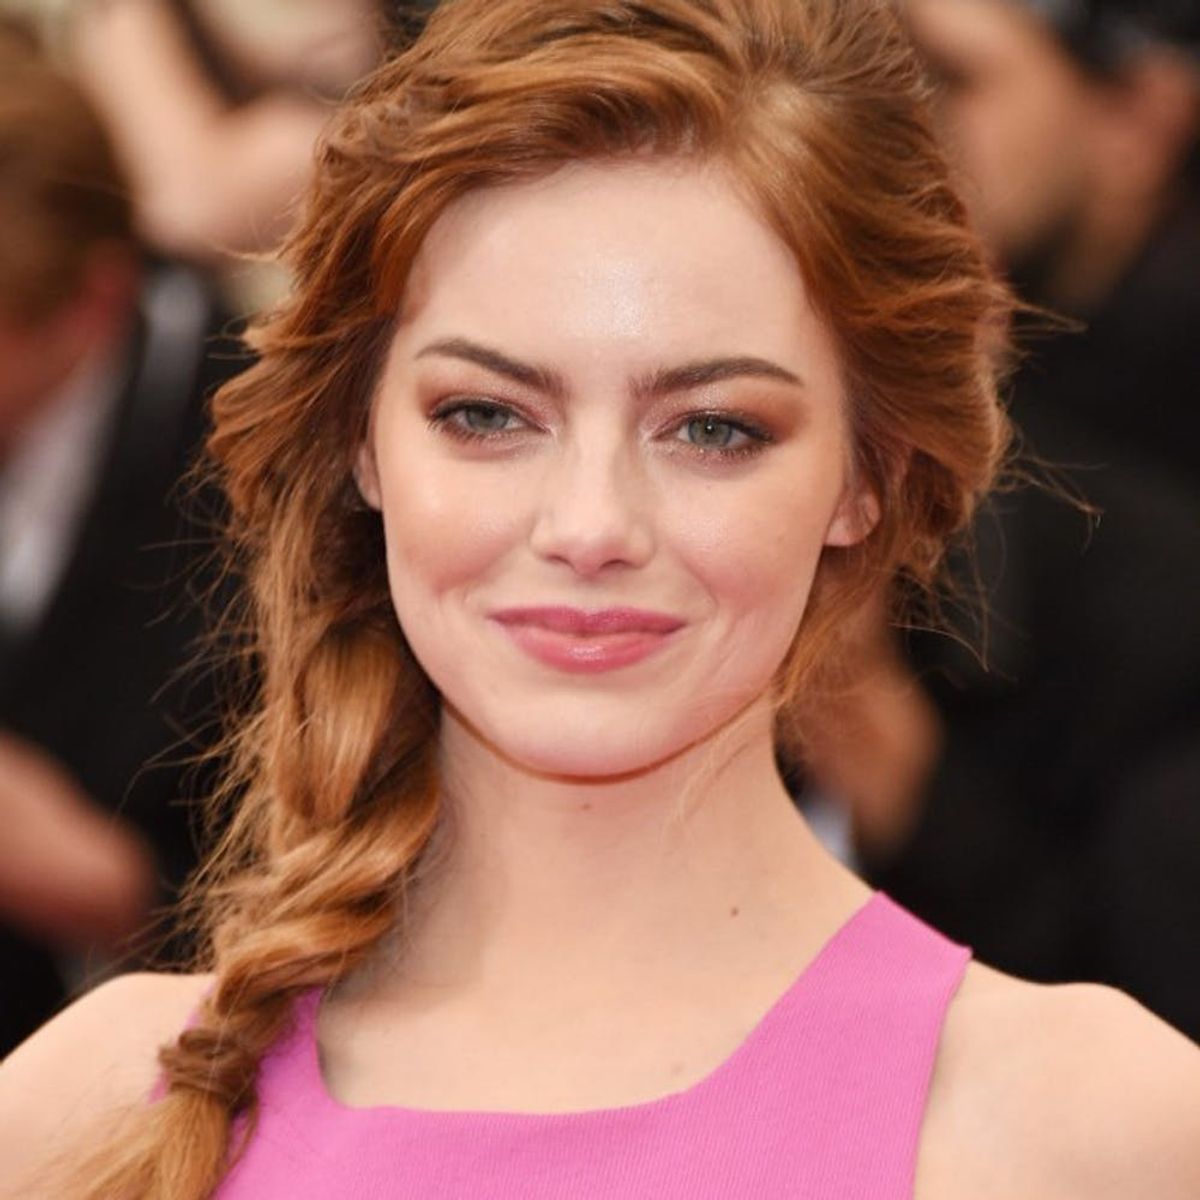 Steal These Easy Celebrity Hairstyles for Your Valentine’s ‘Do